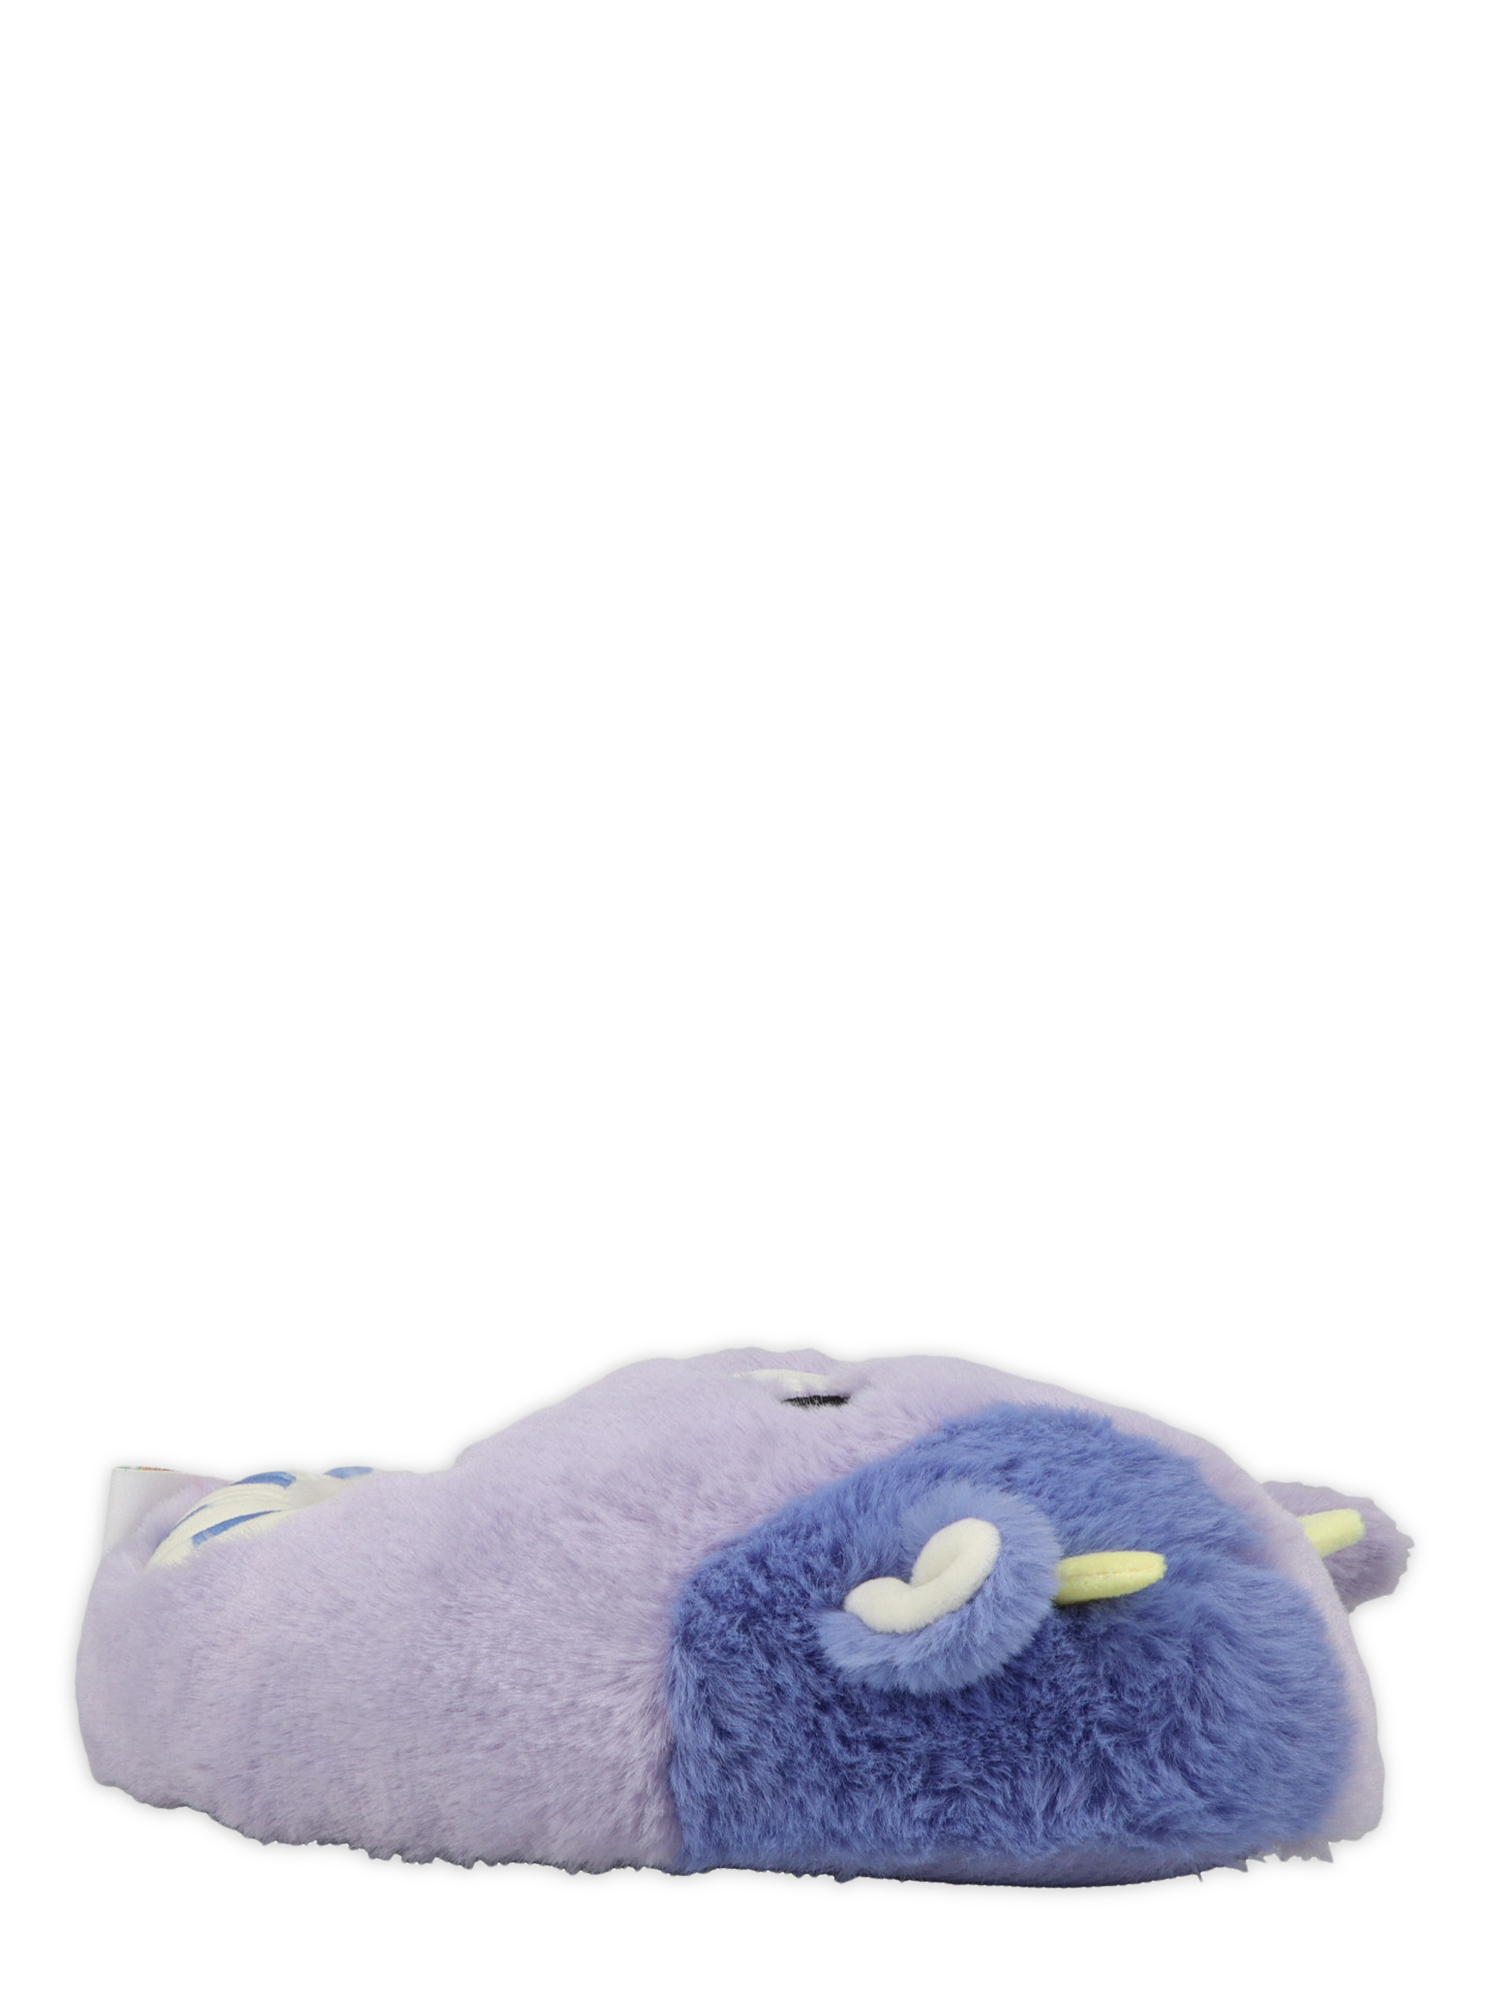 Squishmallows Toddler & Kids Bubba the Cow Slippers - image 2 of 6